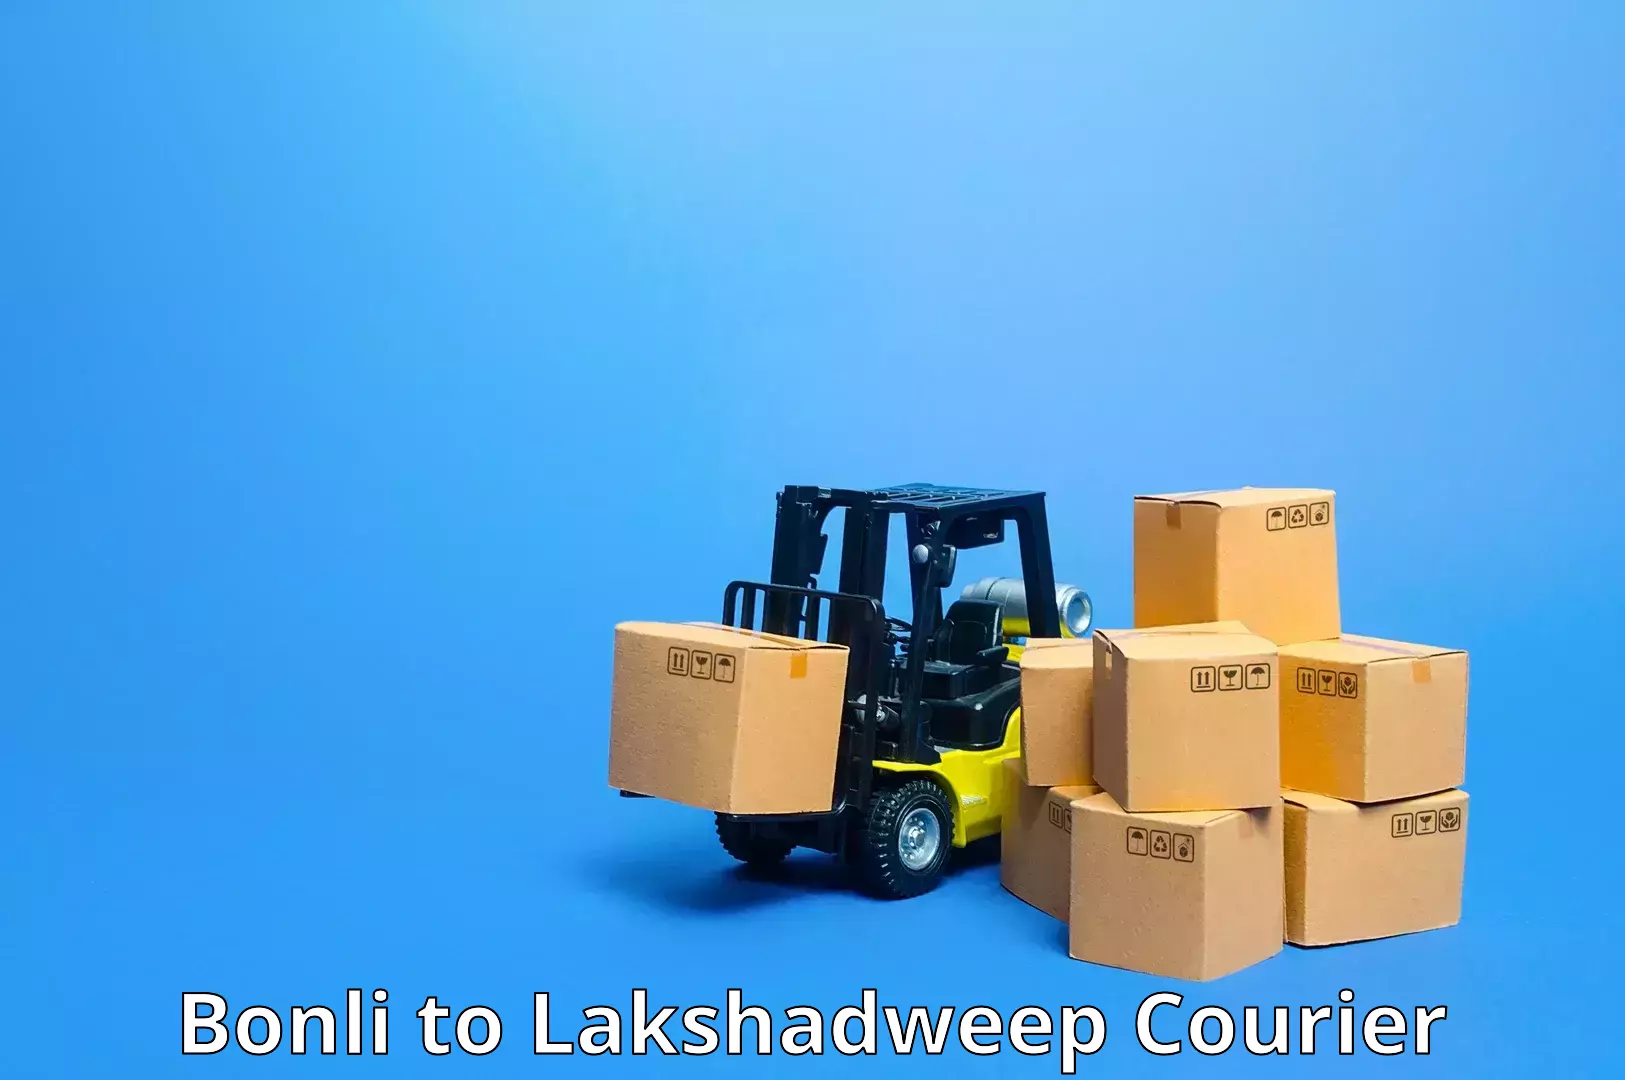 Cost-effective courier options Bonli to Lakshadweep